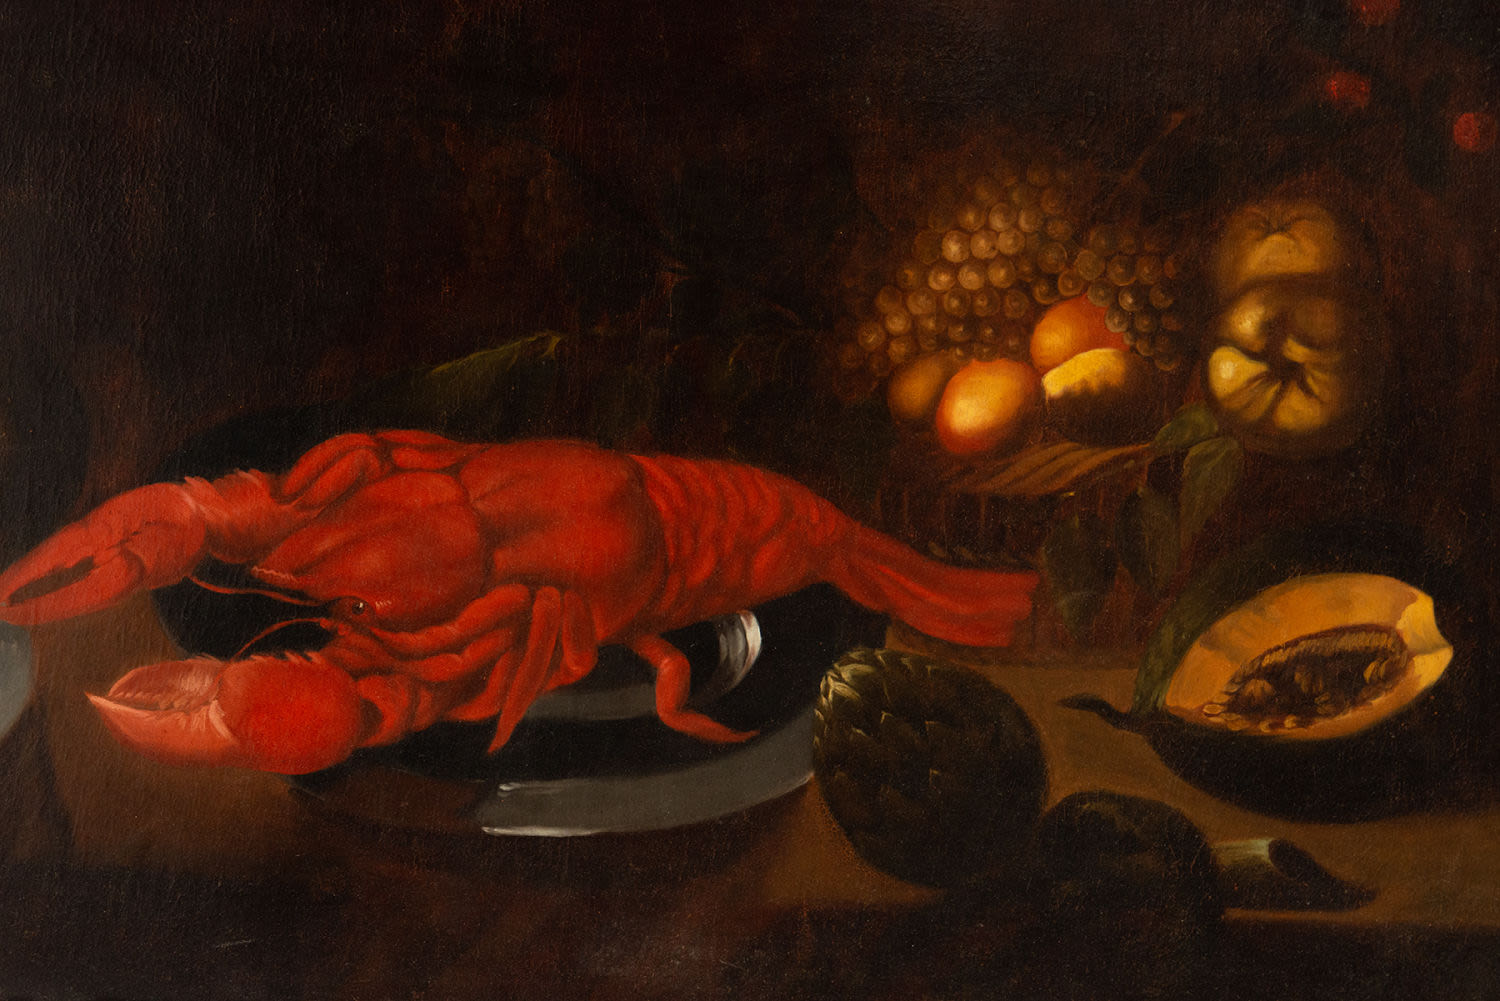 Still Life with Fruit and Lobster, 17th century Dutch school - Image 3 of 7